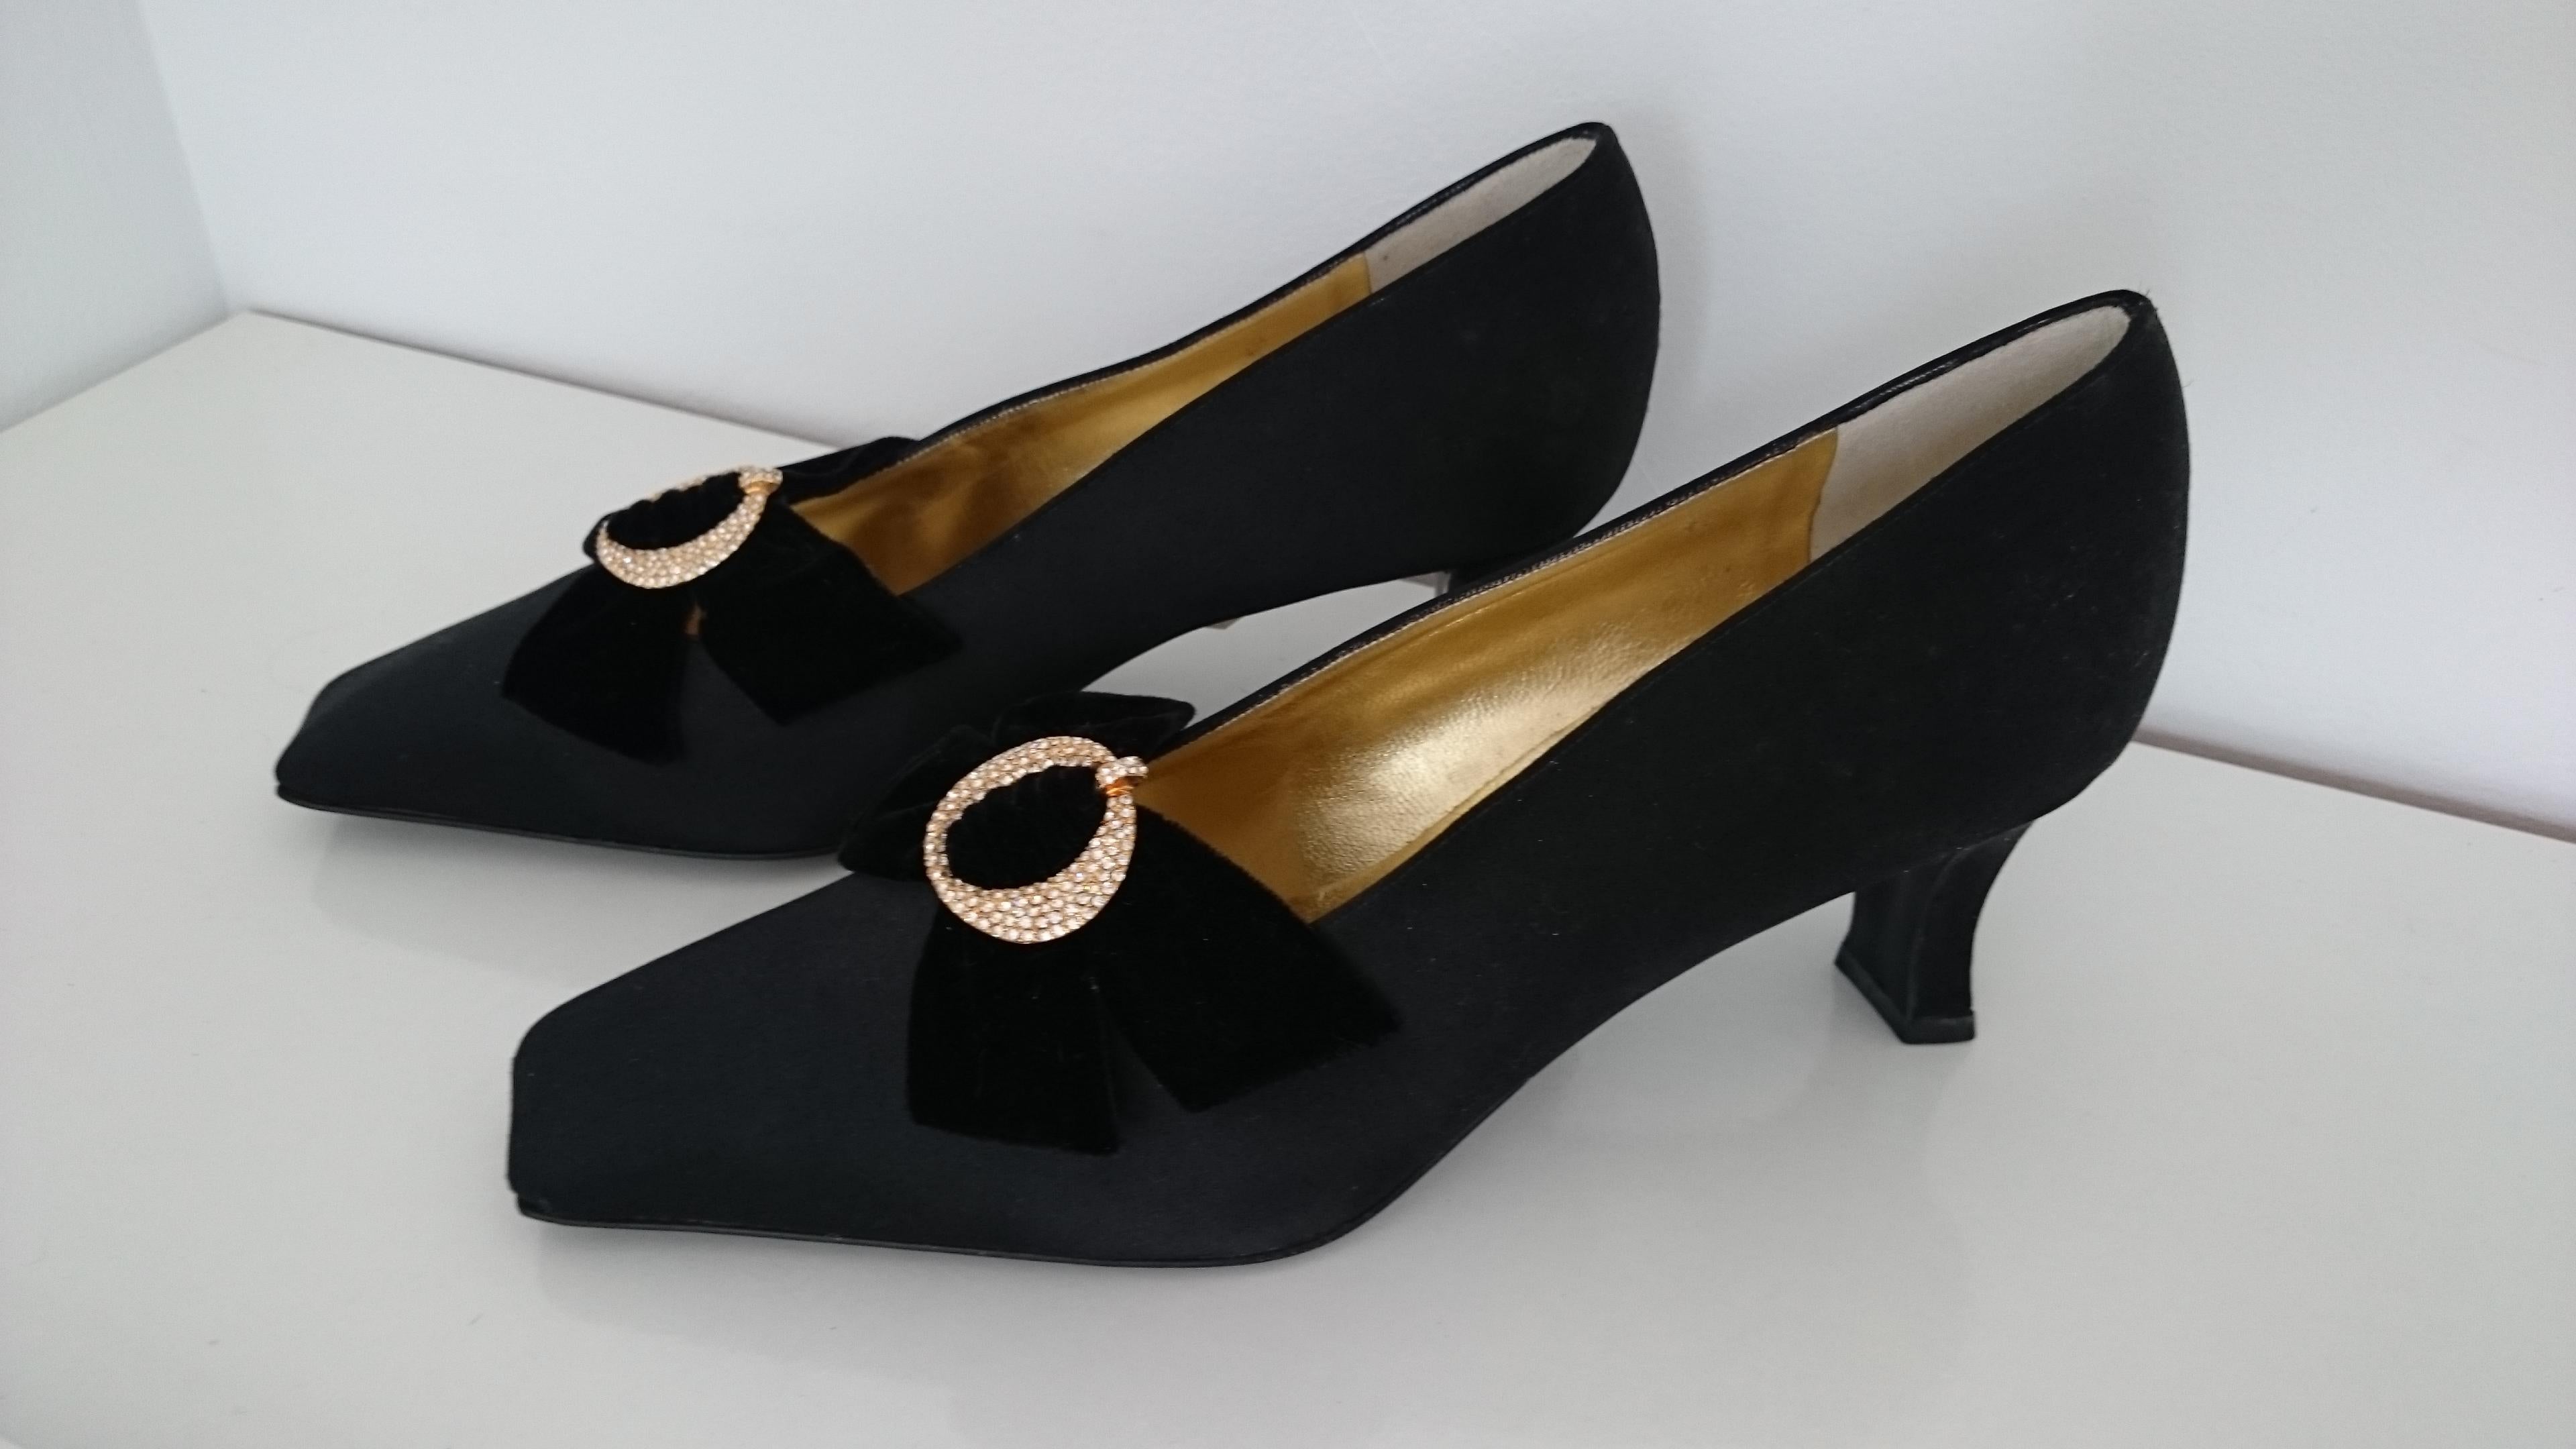 Christian Dior velvet heels.
With bows embroidered with Swarovski. 
Colors: Black and Golden.
Excellent conditions.
Heel height: 7.2 cm
Size 9 1/2 (US)